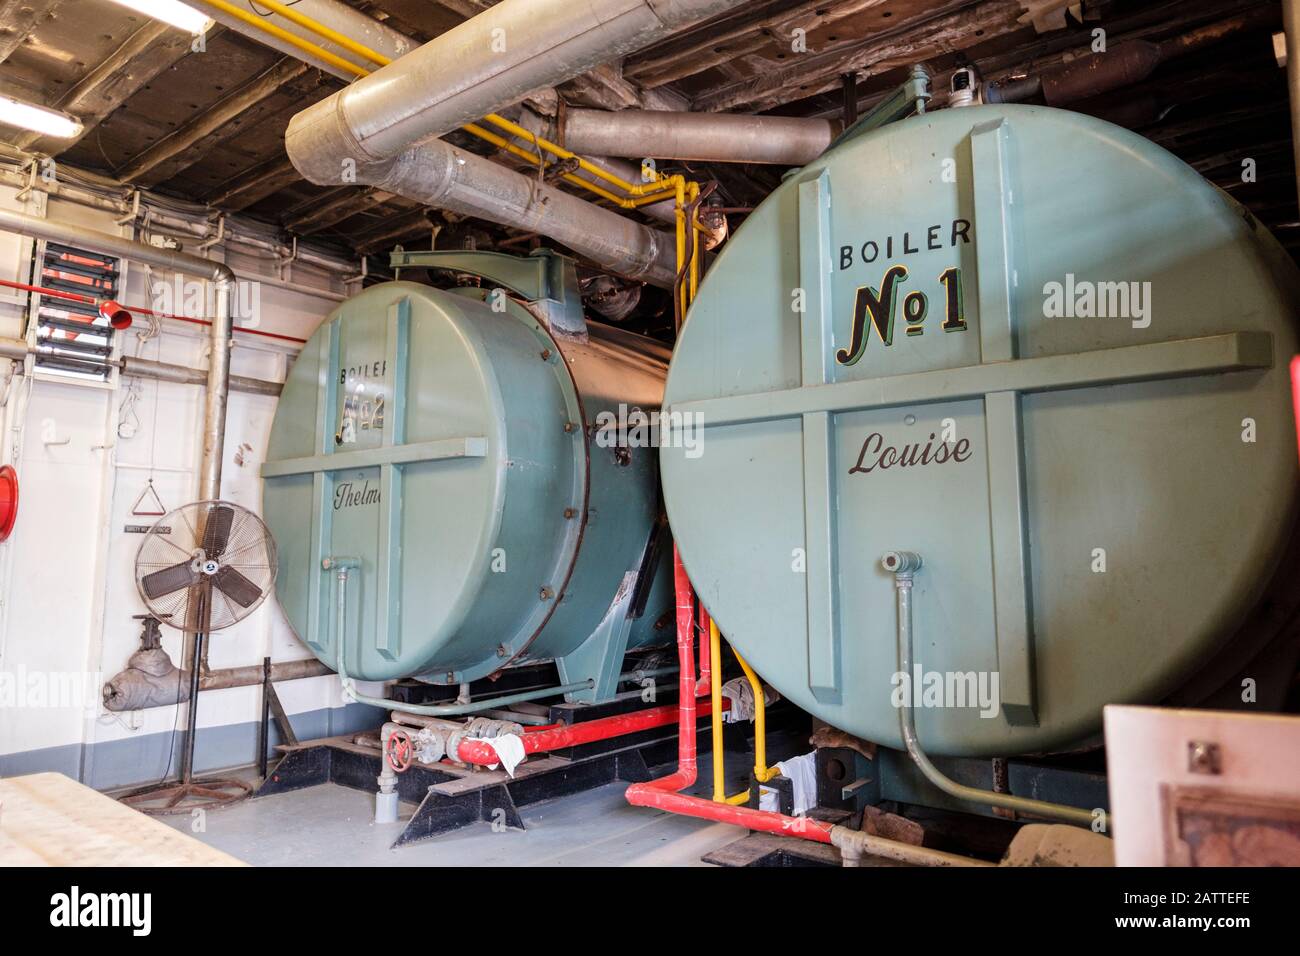 Boilers, boiler room inside steamboat SS Natchez, New Orleans, Louisiana, United States of America, USA Stock Photo